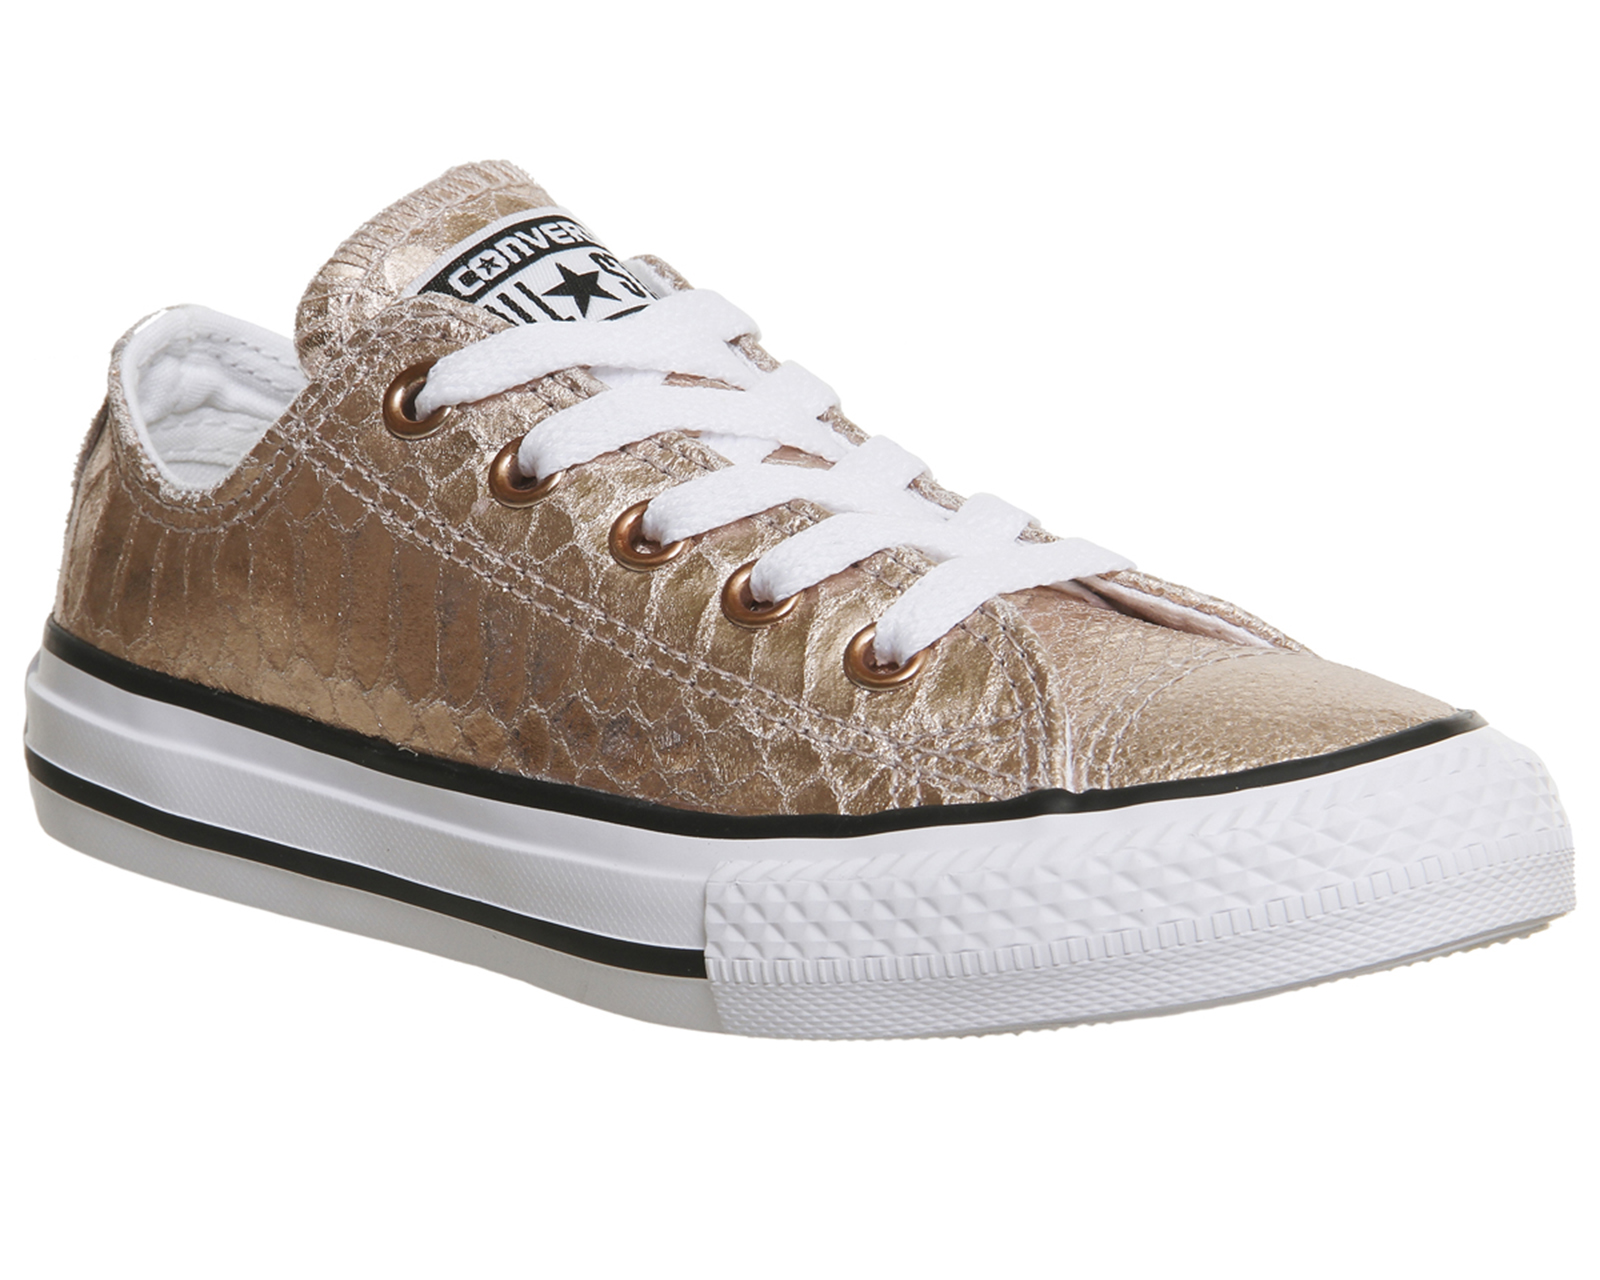 converse all star leather rose gold